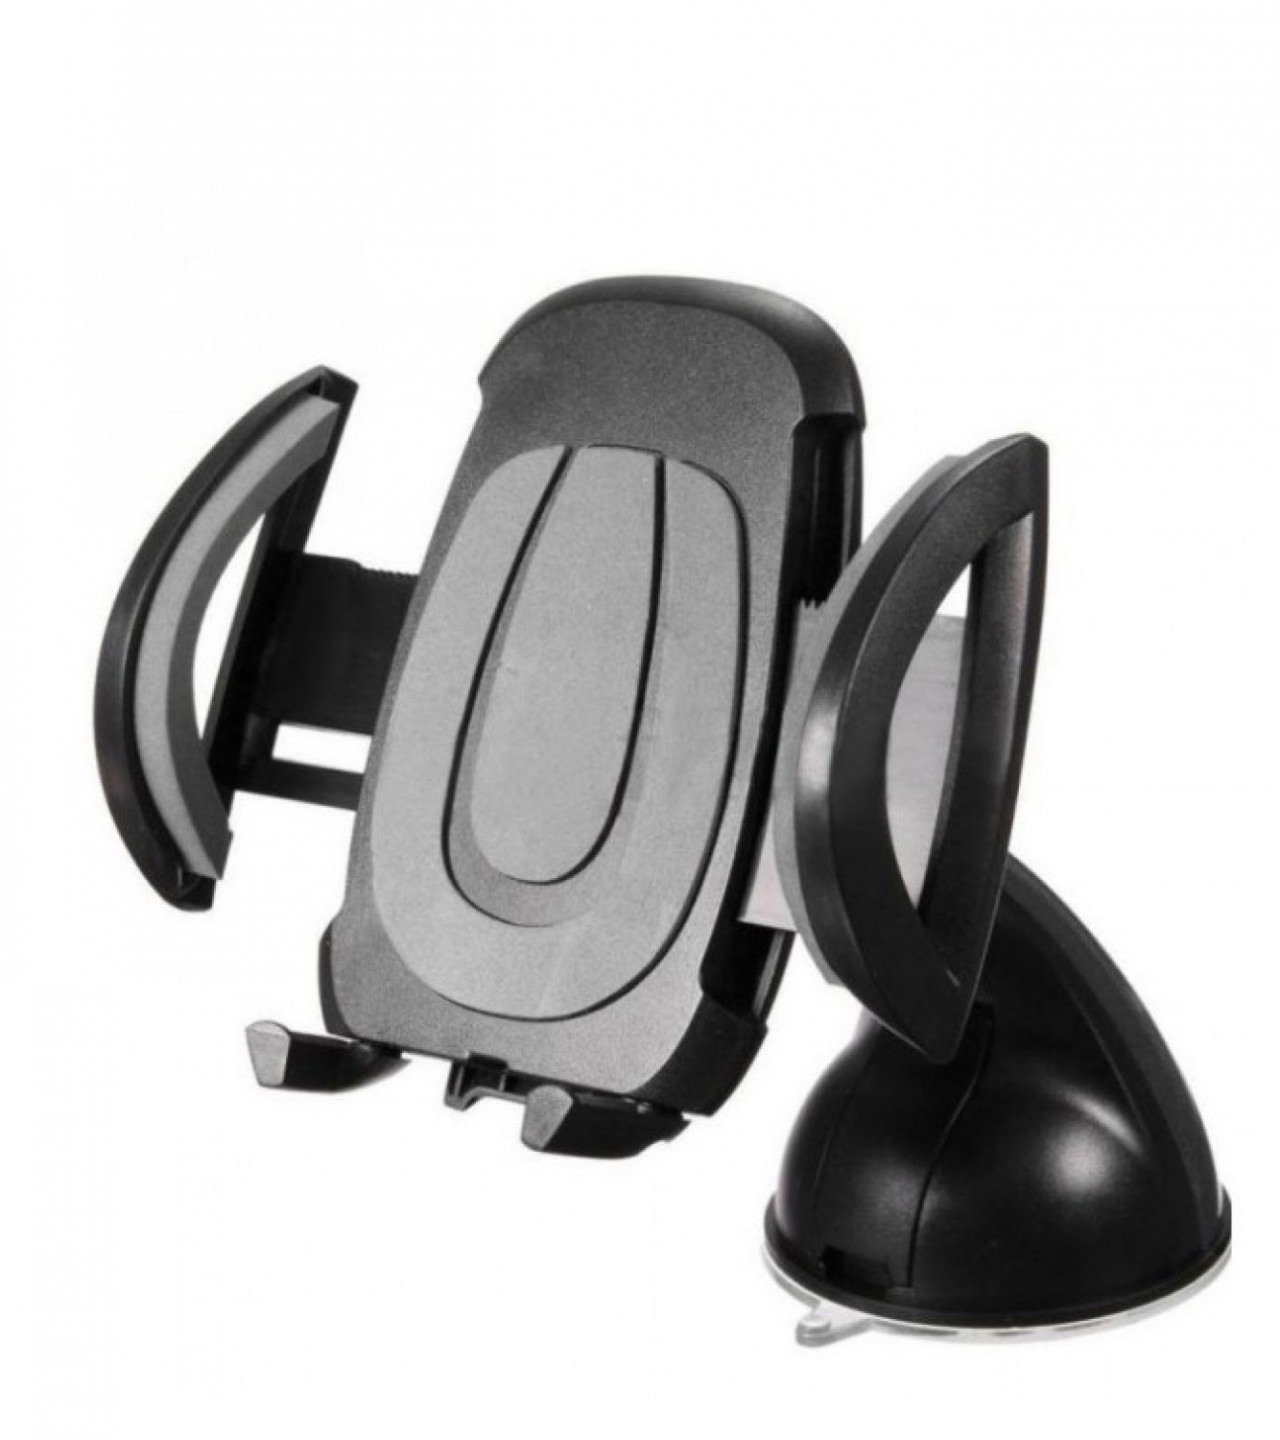 Universal Car Windscreen Suction Mount Mobile Phone Holder Stand